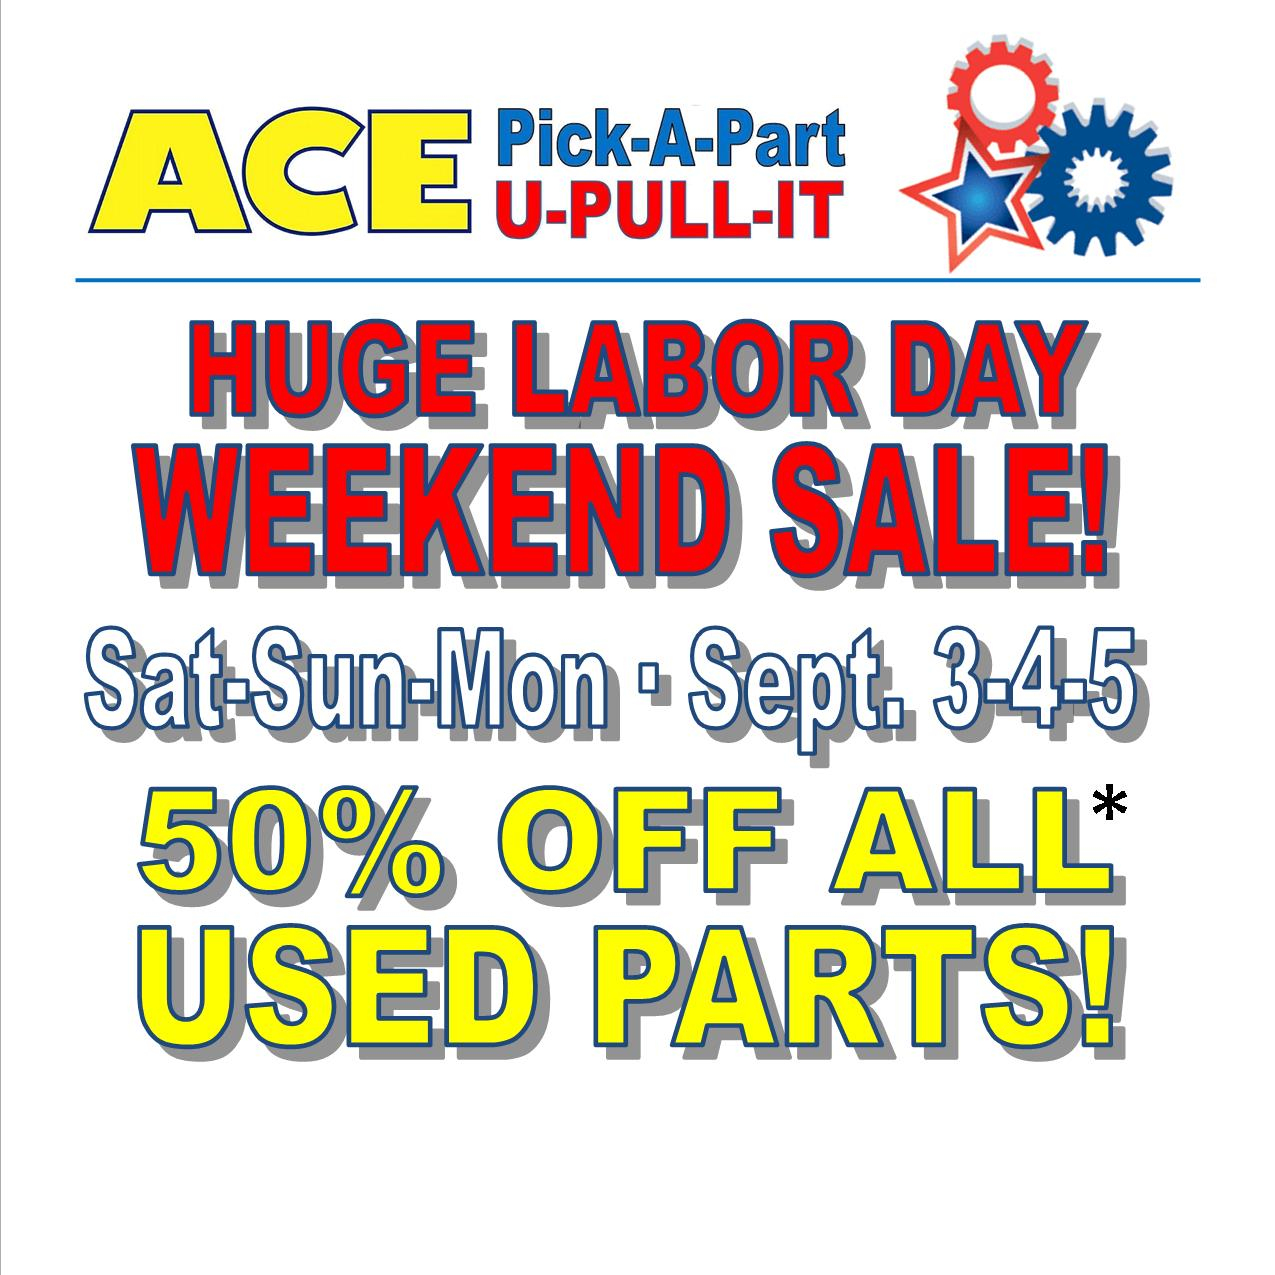 labor day weekend sale sept 3-5